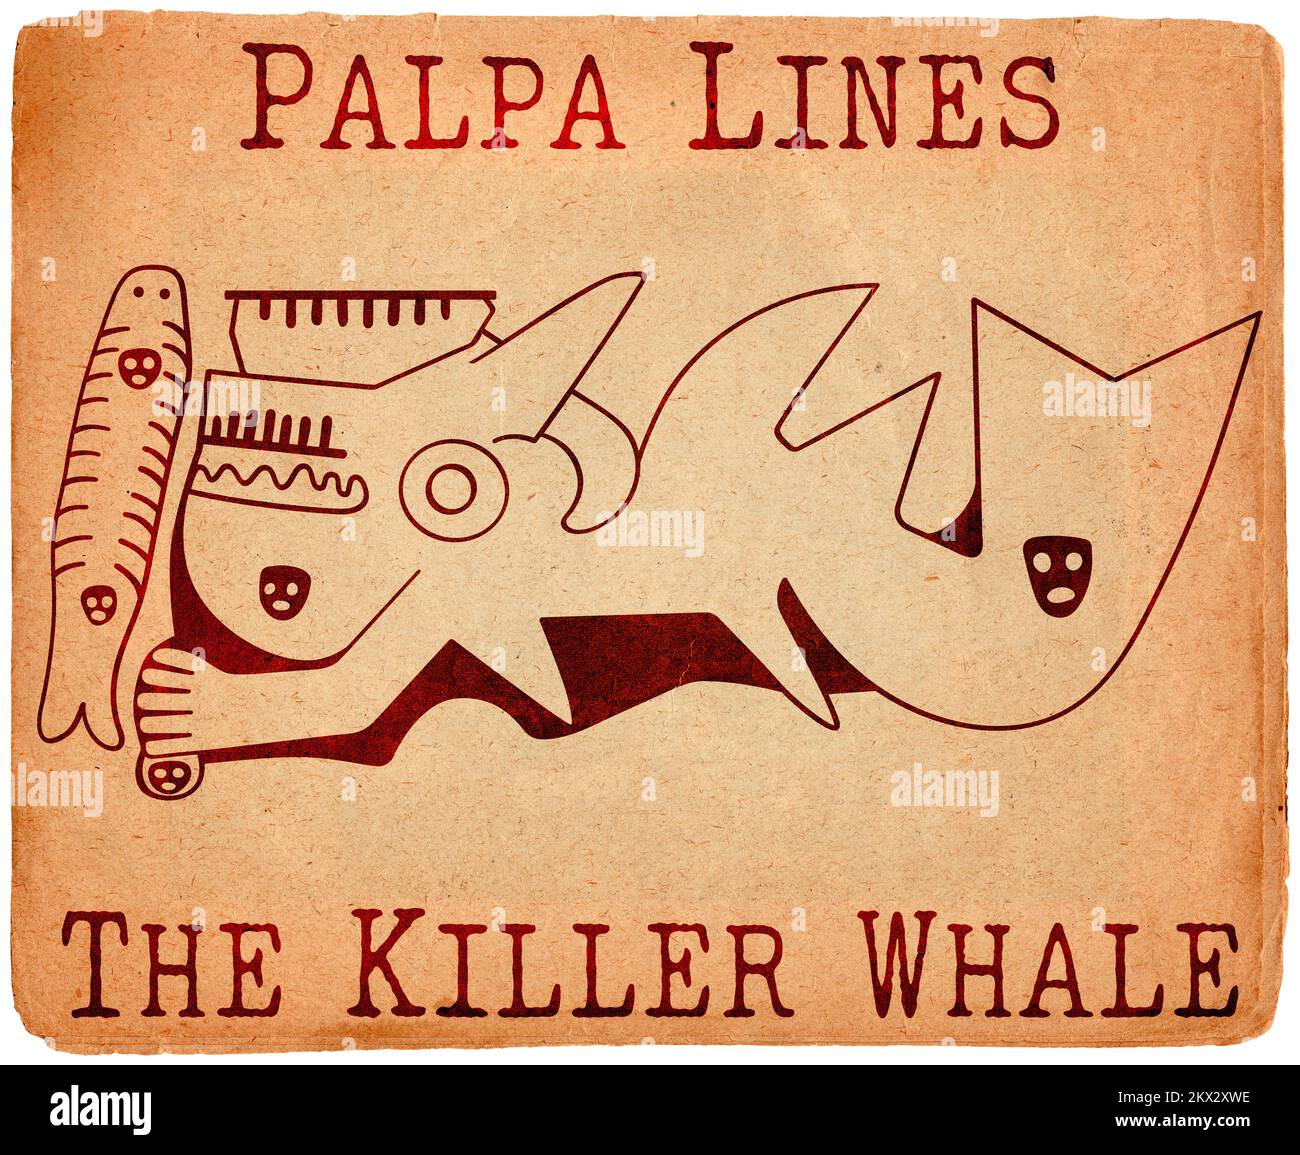 Geoglyph of The Killer Whale from Palpa, The Palpa Lines, Peru Stock Photo